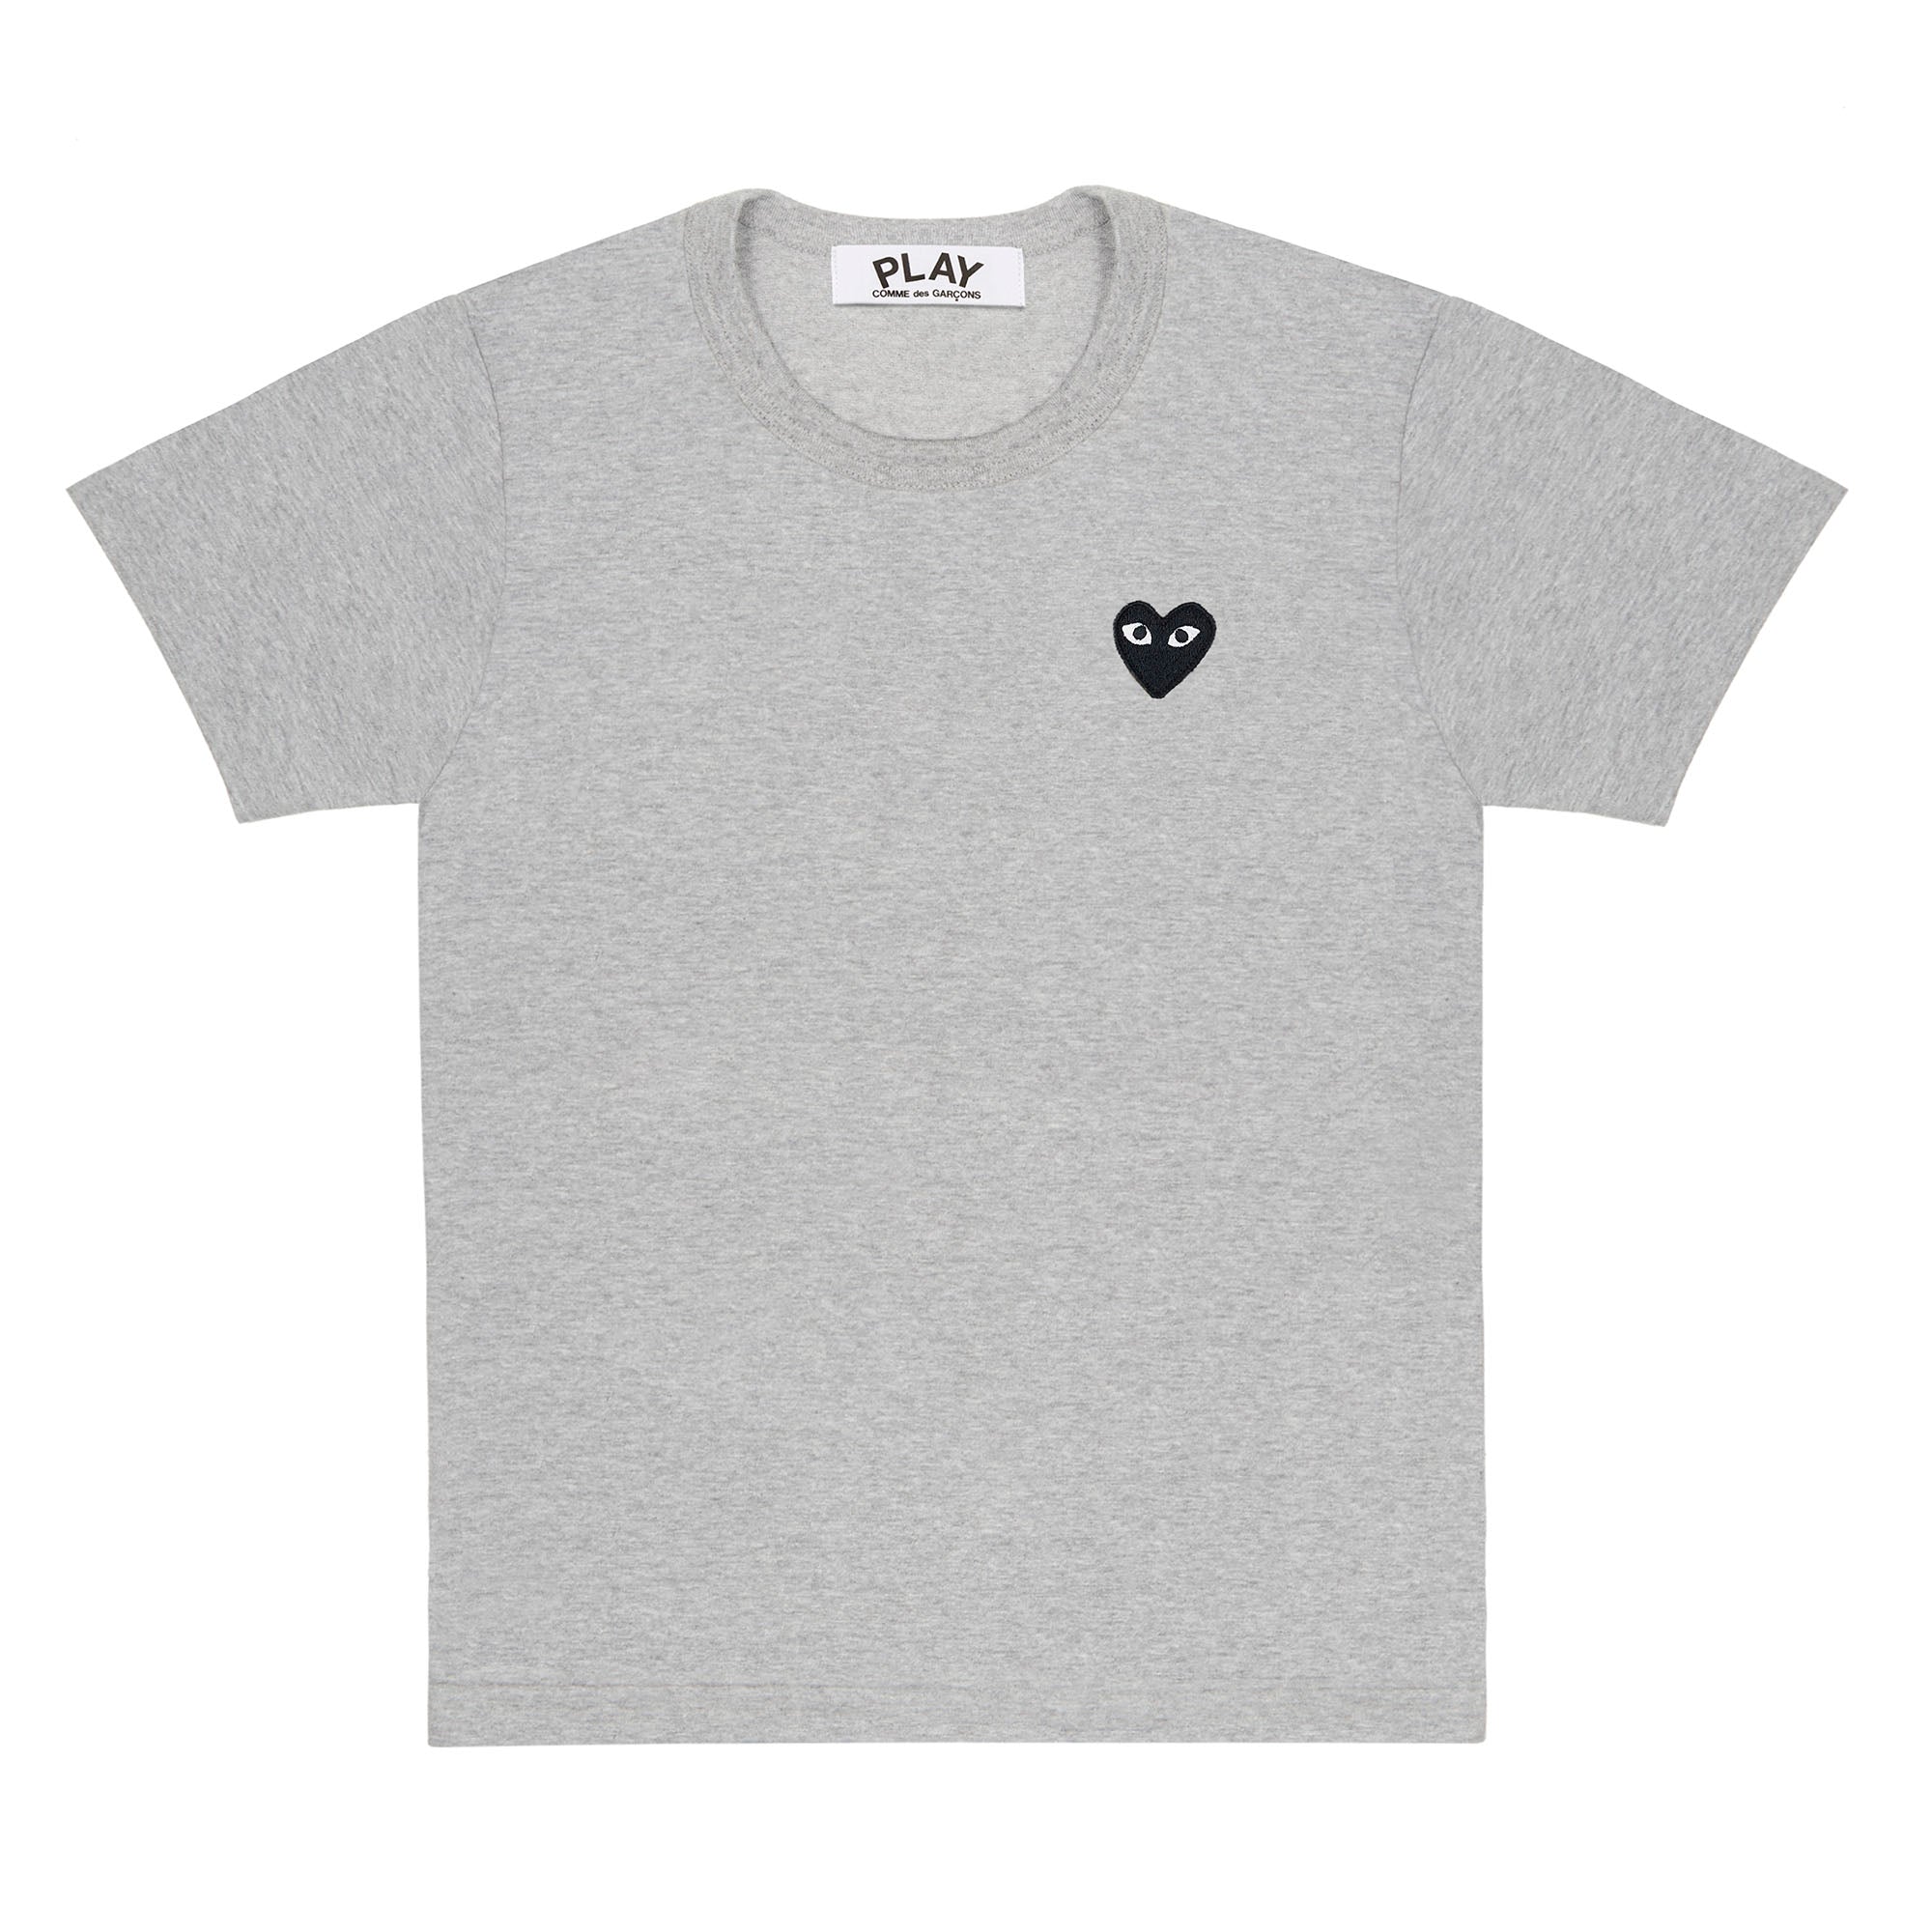 PLAY CDG - TOP DYED COTTON JERSEY WITH BLACK EMBLEM - (TOP DYED GREY) view 1